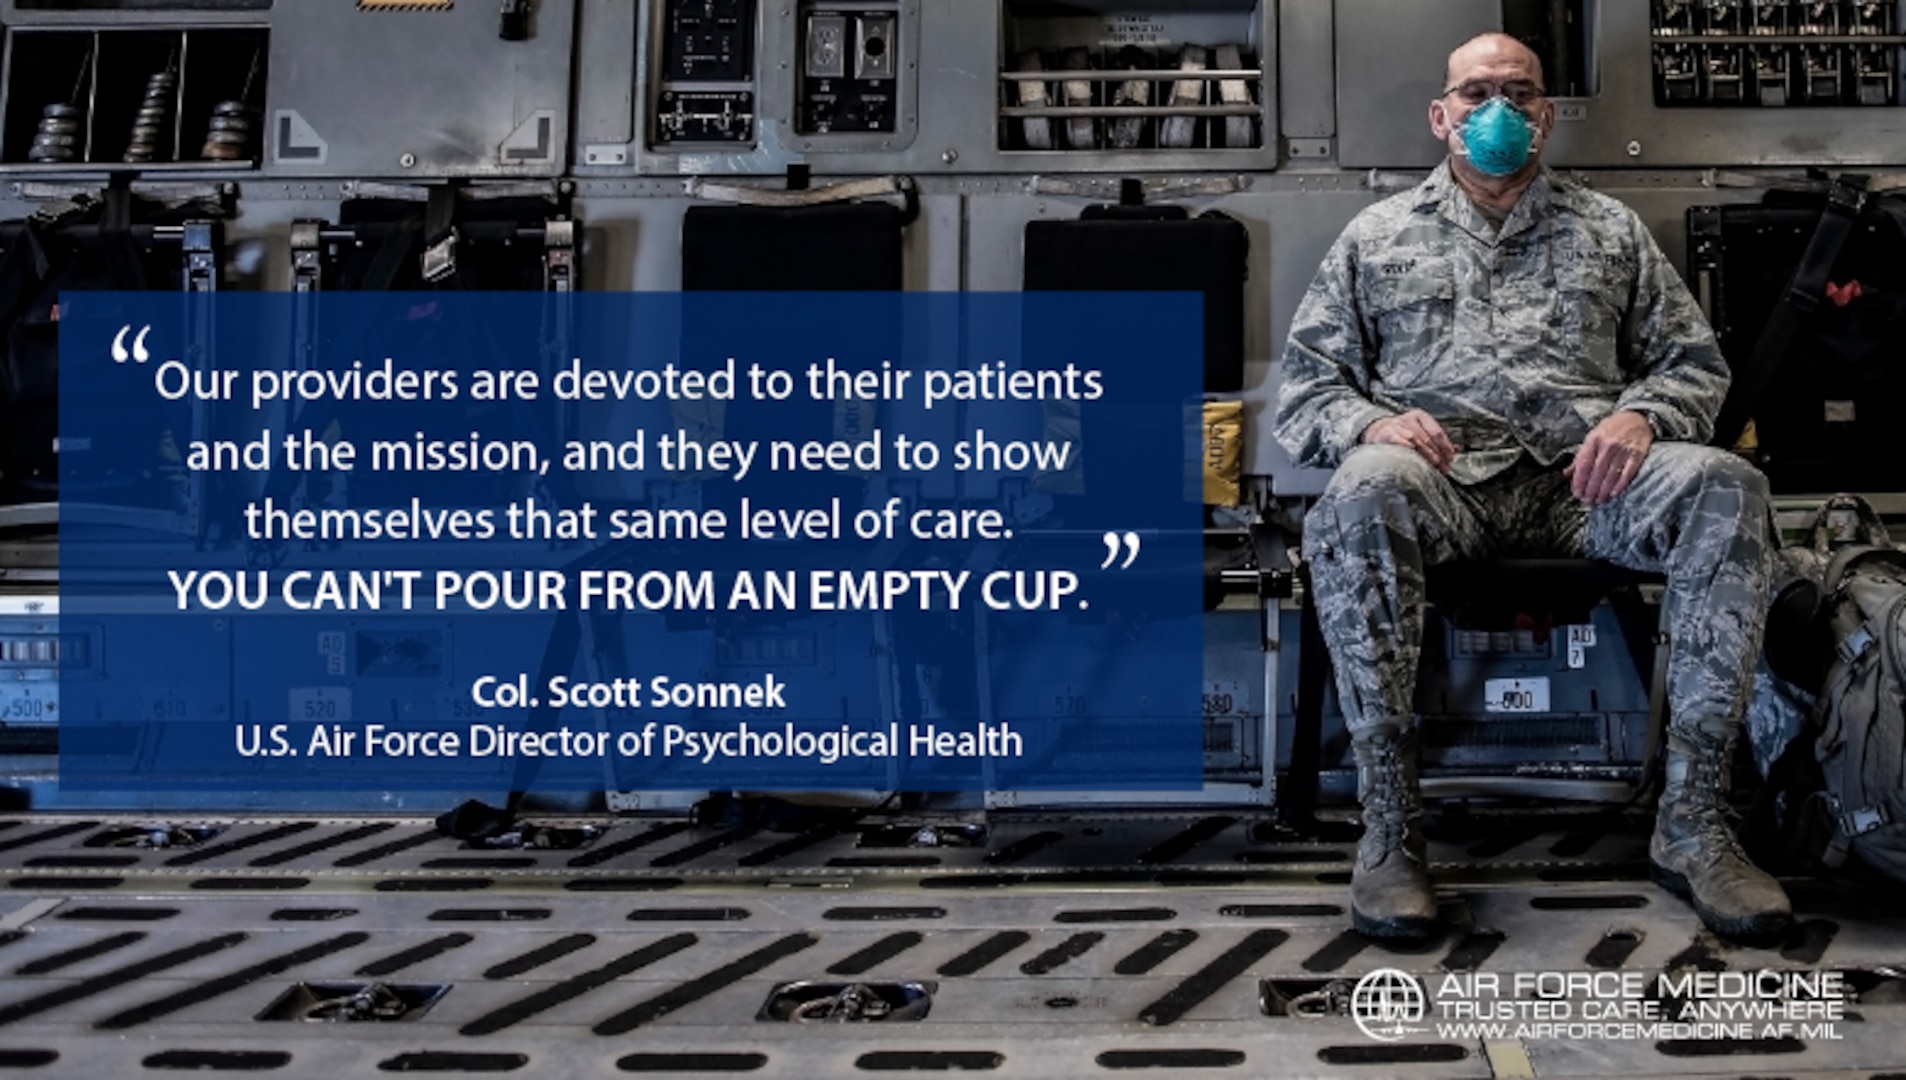 The COVID-19 pandemic can challenge the mental wellness of health workers and contribute to provider burnout. Air Force medics are cautioned to be alert for signs of numbness in themselves or colleagues, and make time for self-care and recharge.